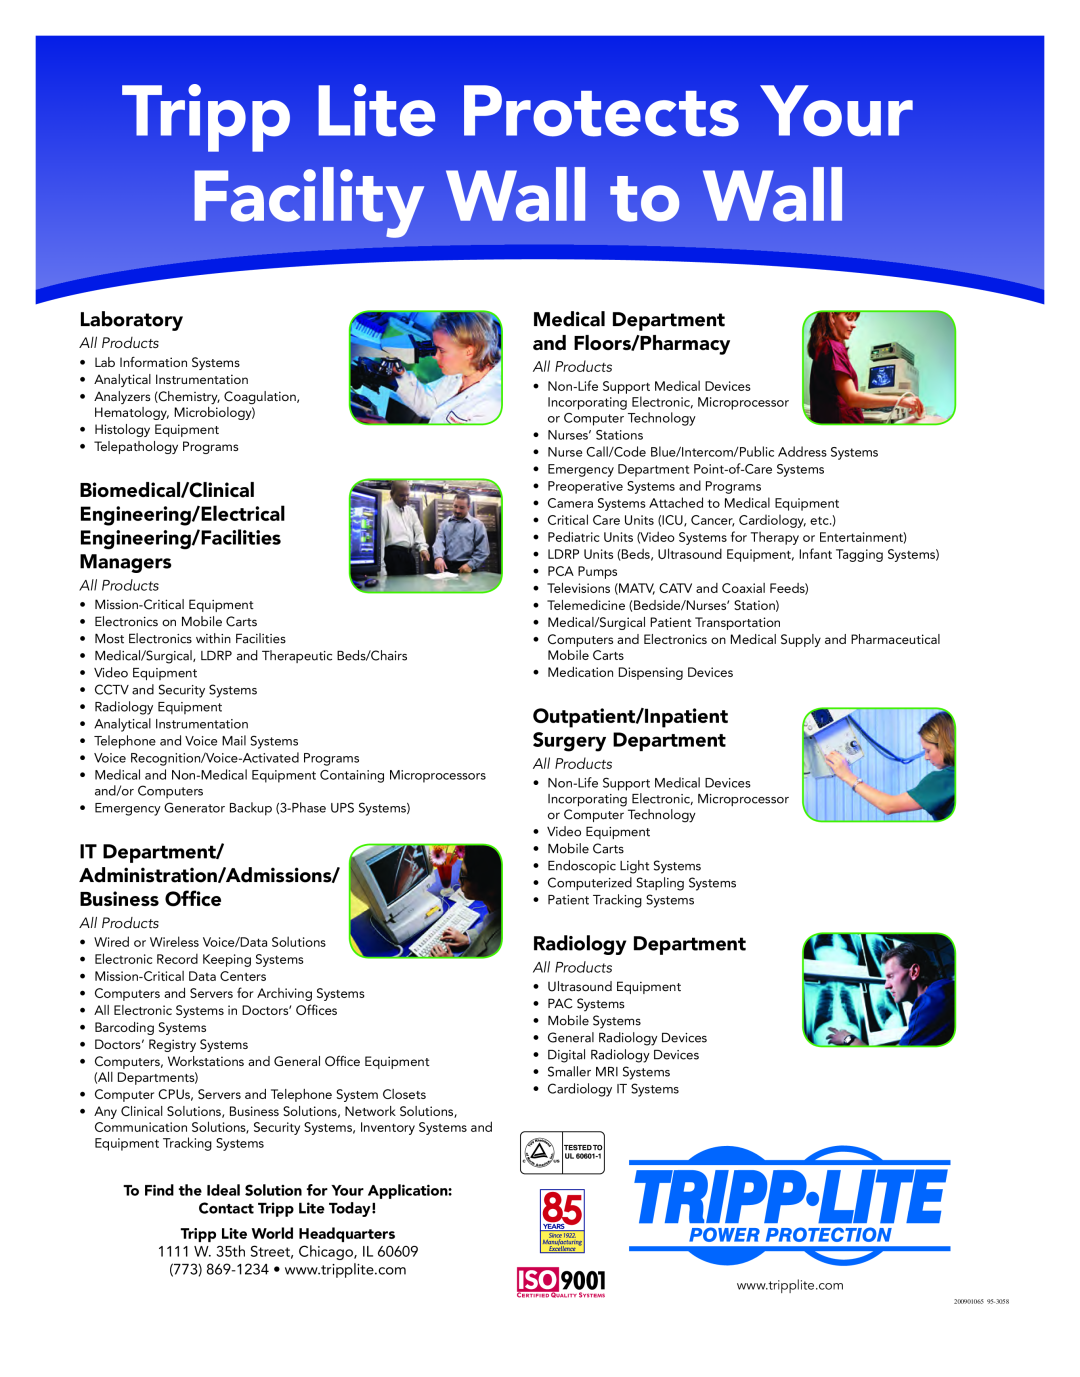 Tripp Lite UL 60601-1 manual Tripp Lite Protects Your Facility Wall to Wall, Laboratory, Managers, Radiology Department 